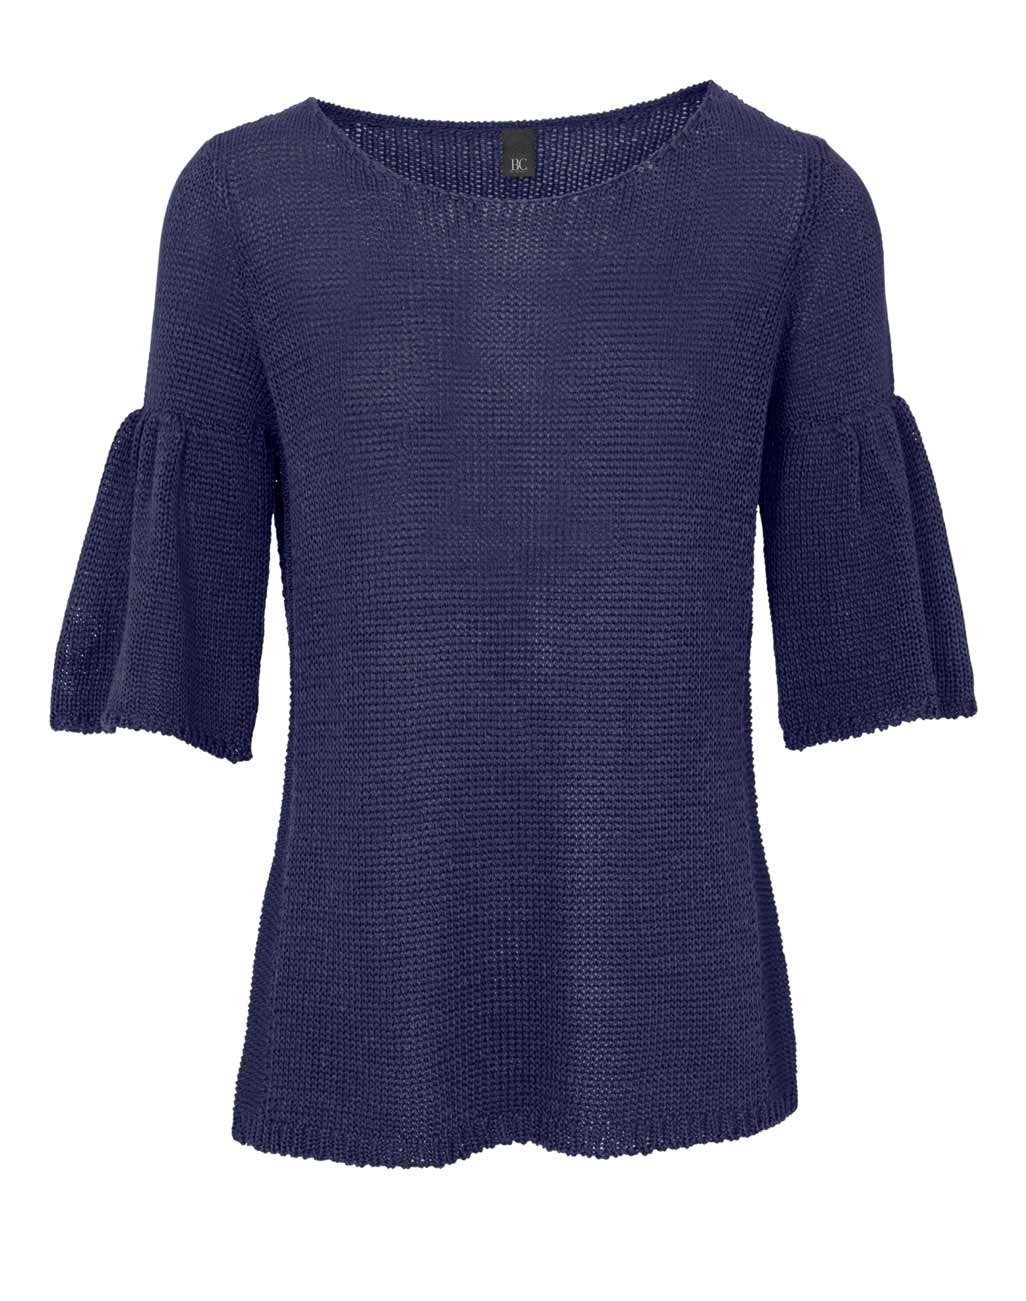 B.C. Best Connection by heine Longpullover Heine - Best Connections Damen Volantpullover, marine